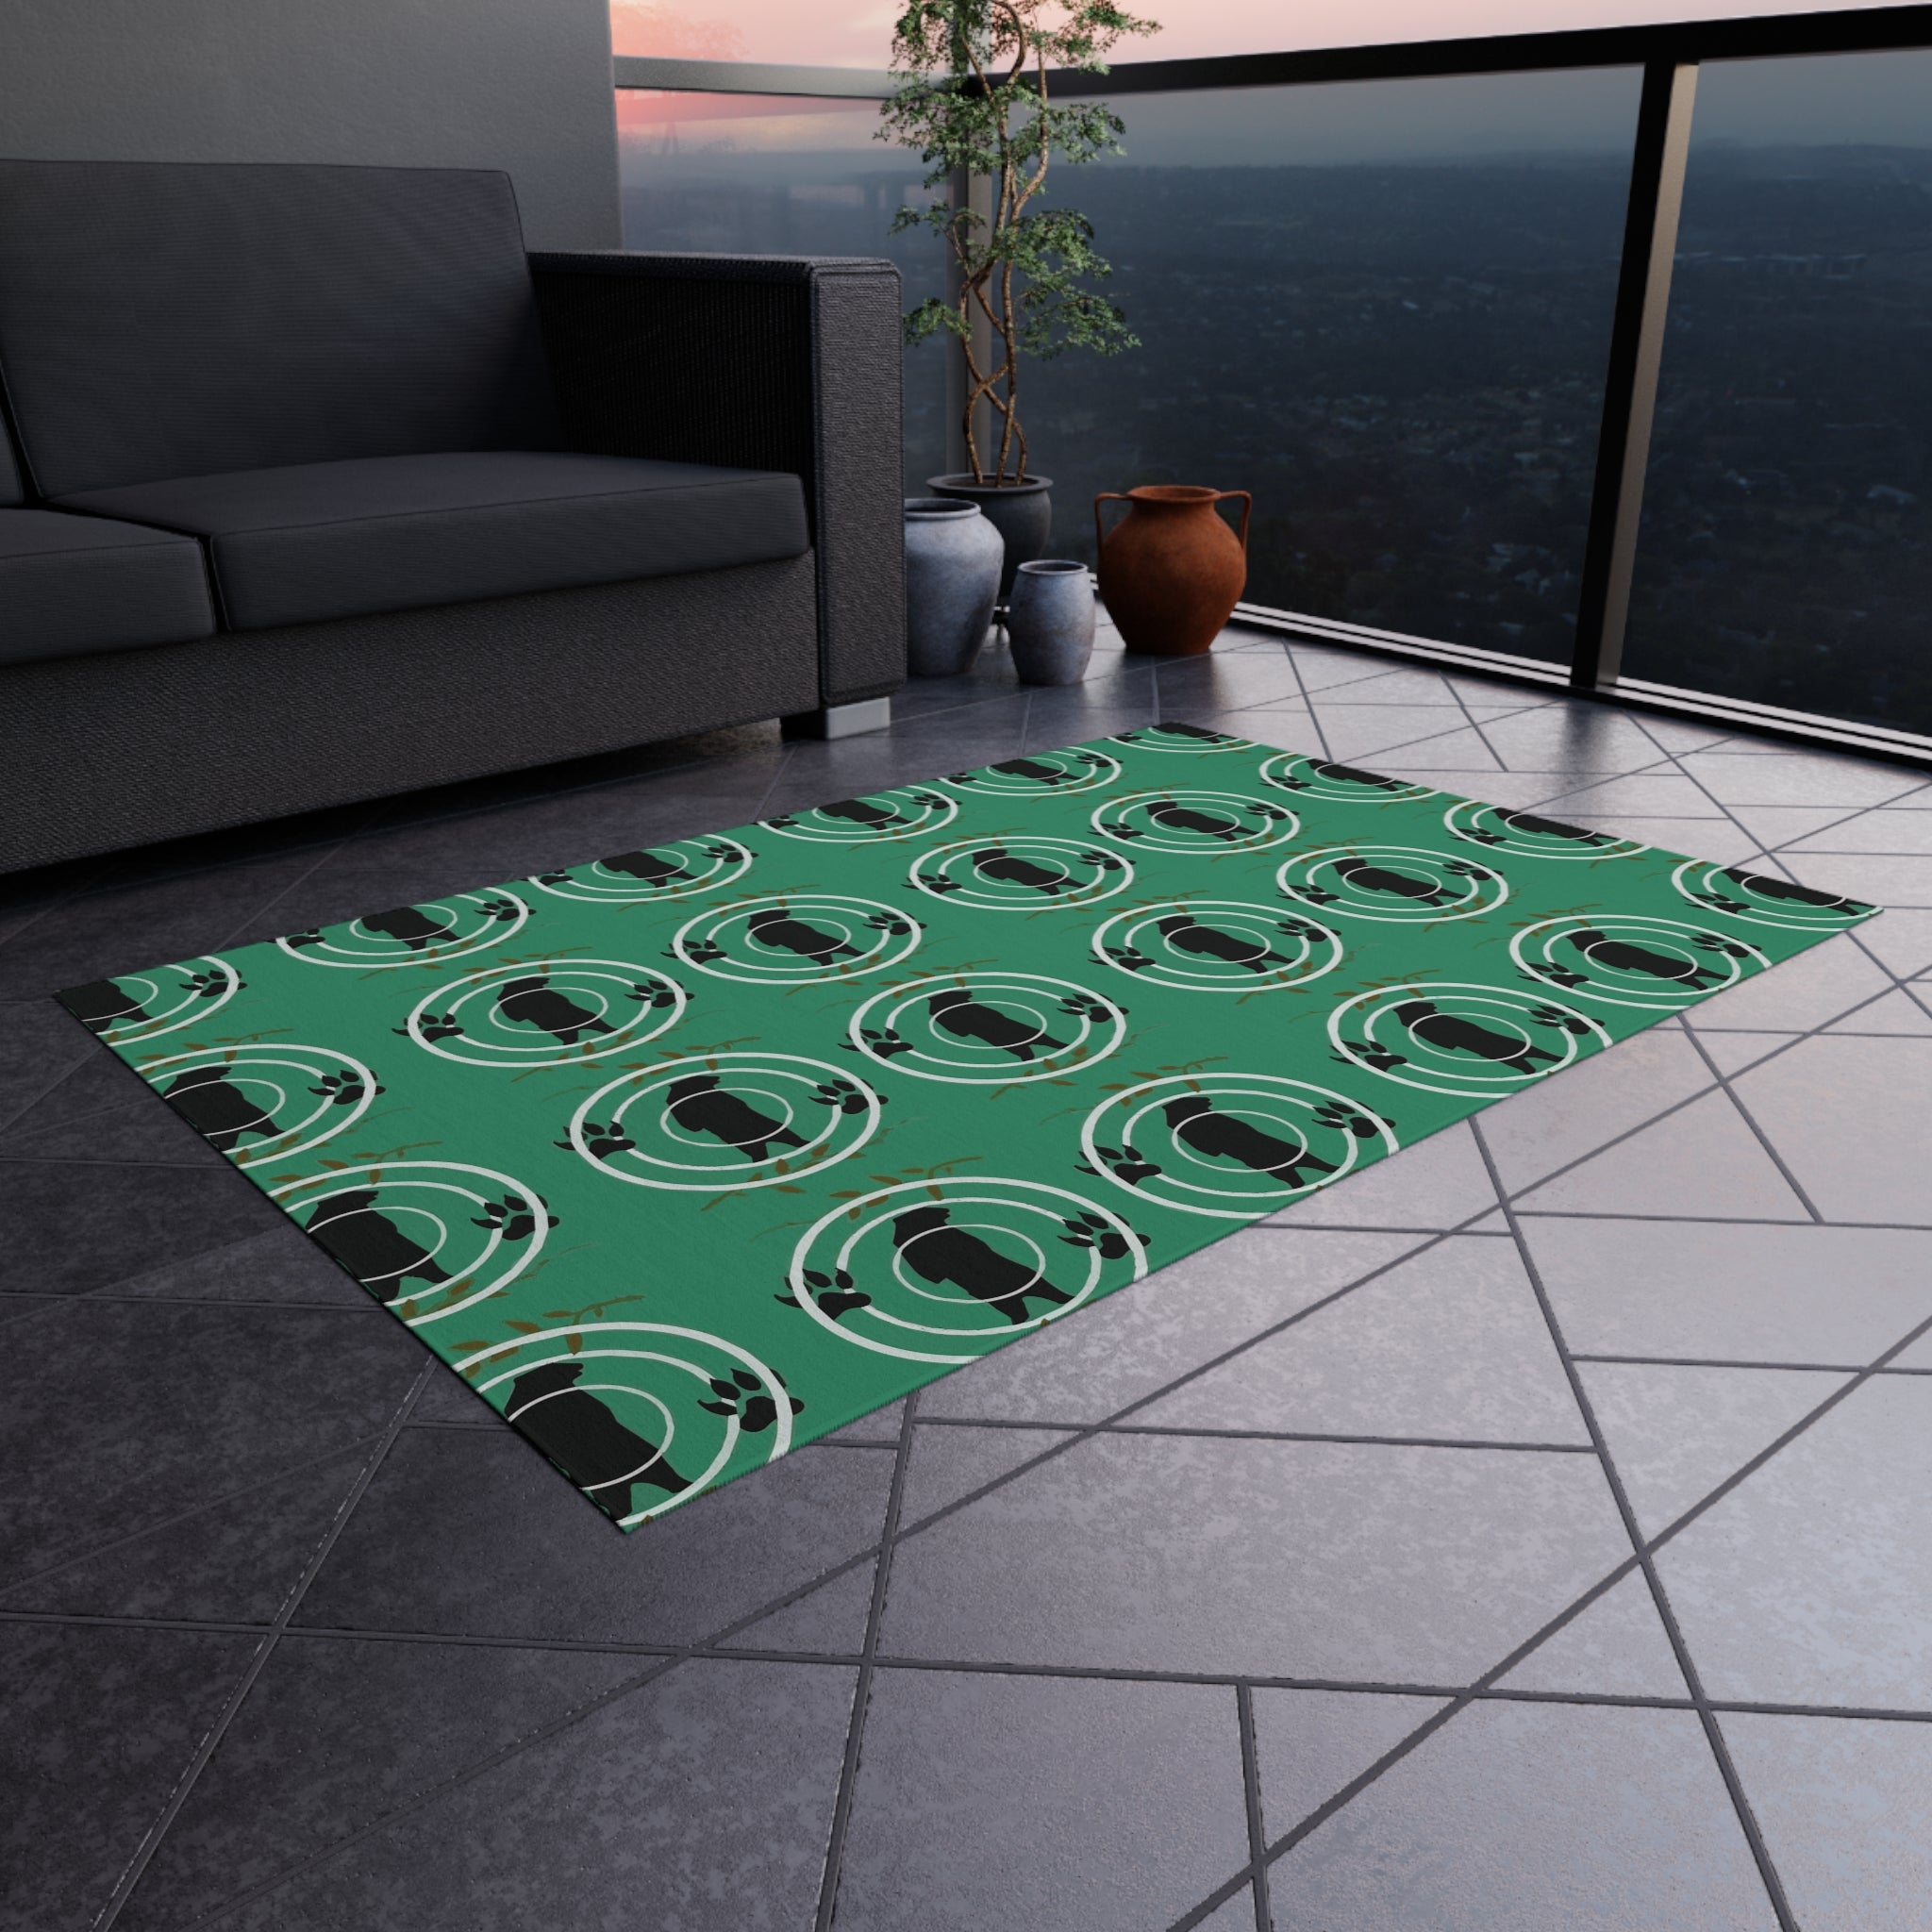 Country Black Bear Green Outdoor Rugs